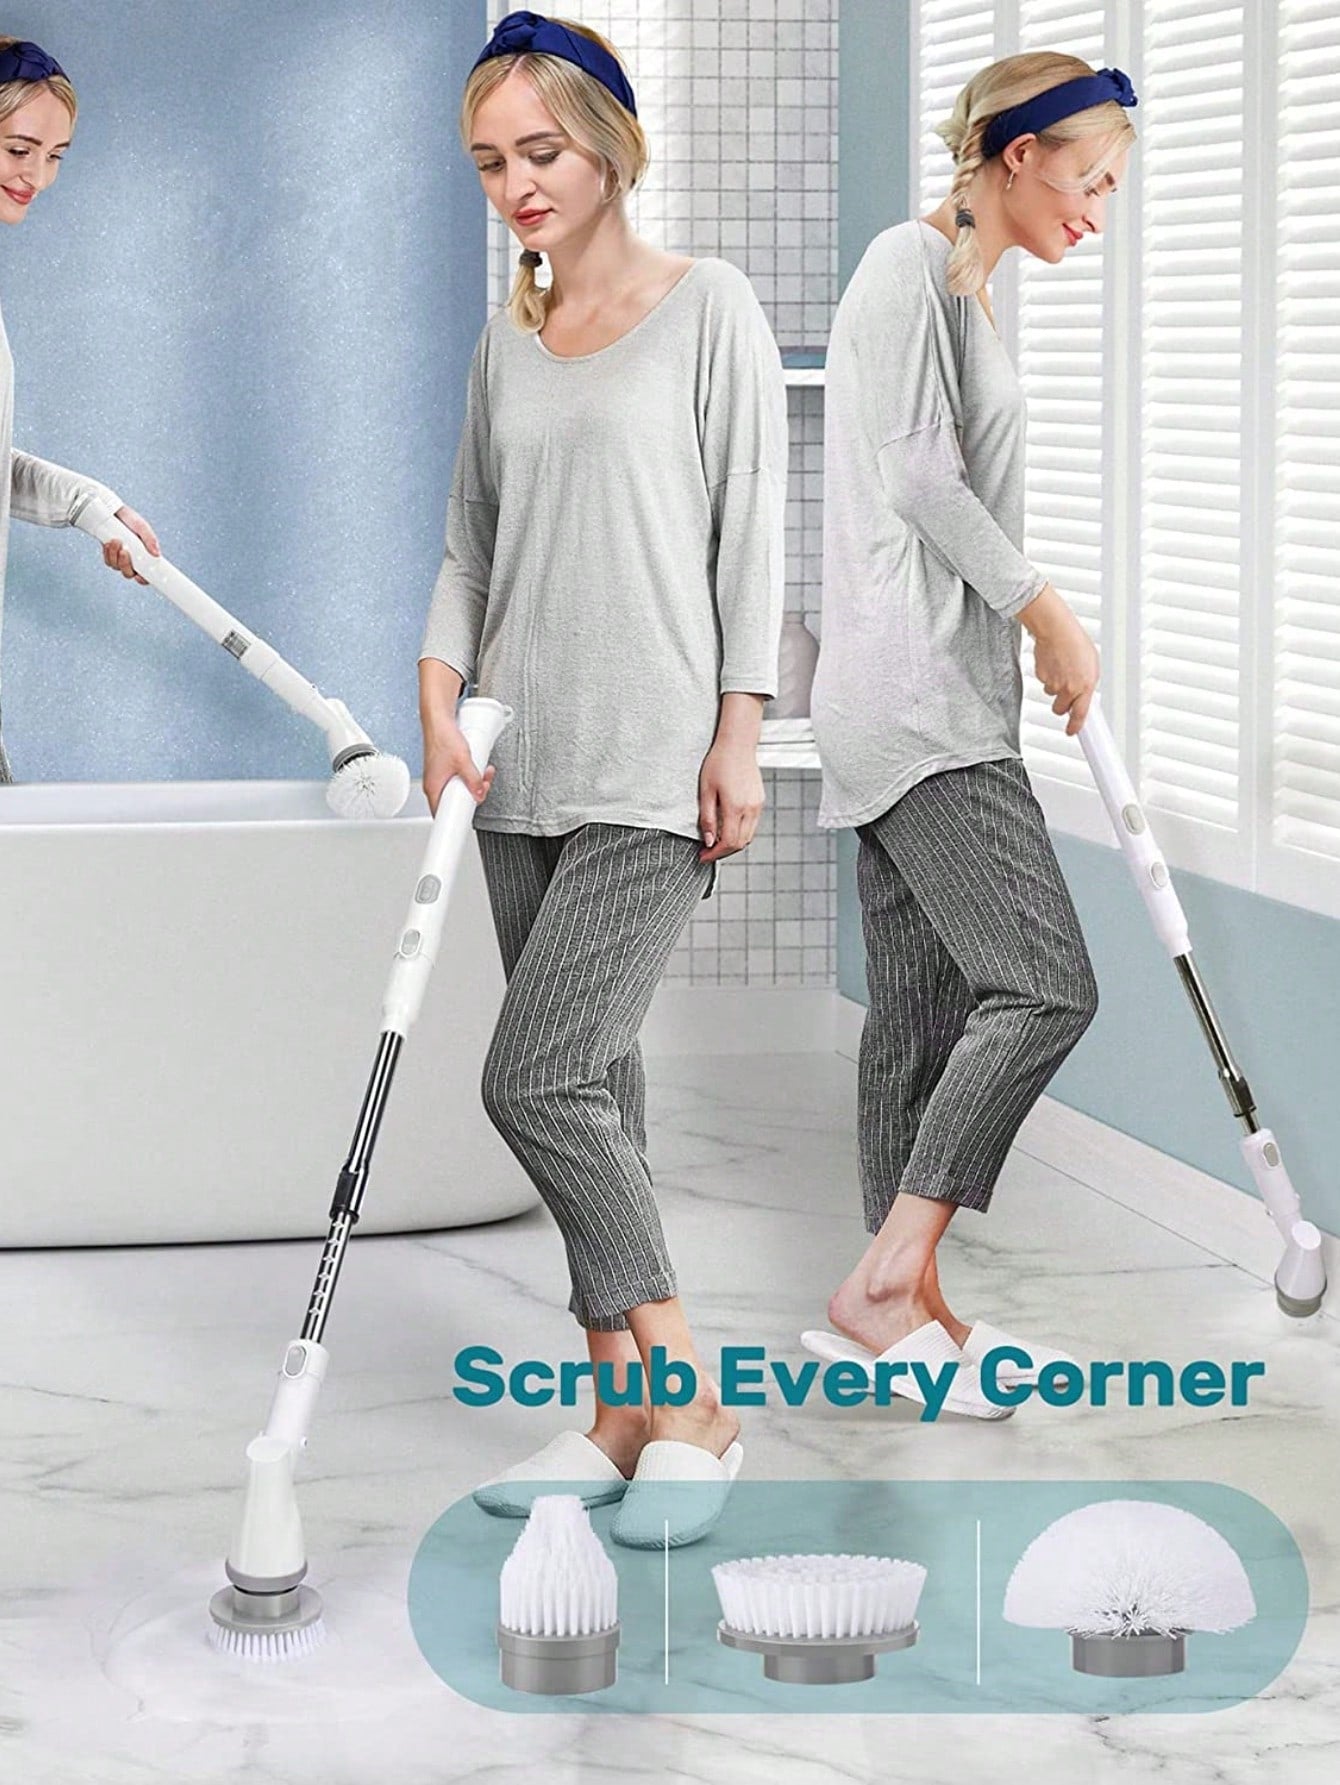 1 Set Plug-in Charge Wireless White Electric Spinning Floor Scrubber, With Extendable Handle Shower Scrubber, With 3 Replaceable Brush Head Bathtub Tile Floor Scrubber, 60 Minutes Running Time, 350 Rpm, With High Torque Motor, Suitable For Bathroom,-White-7